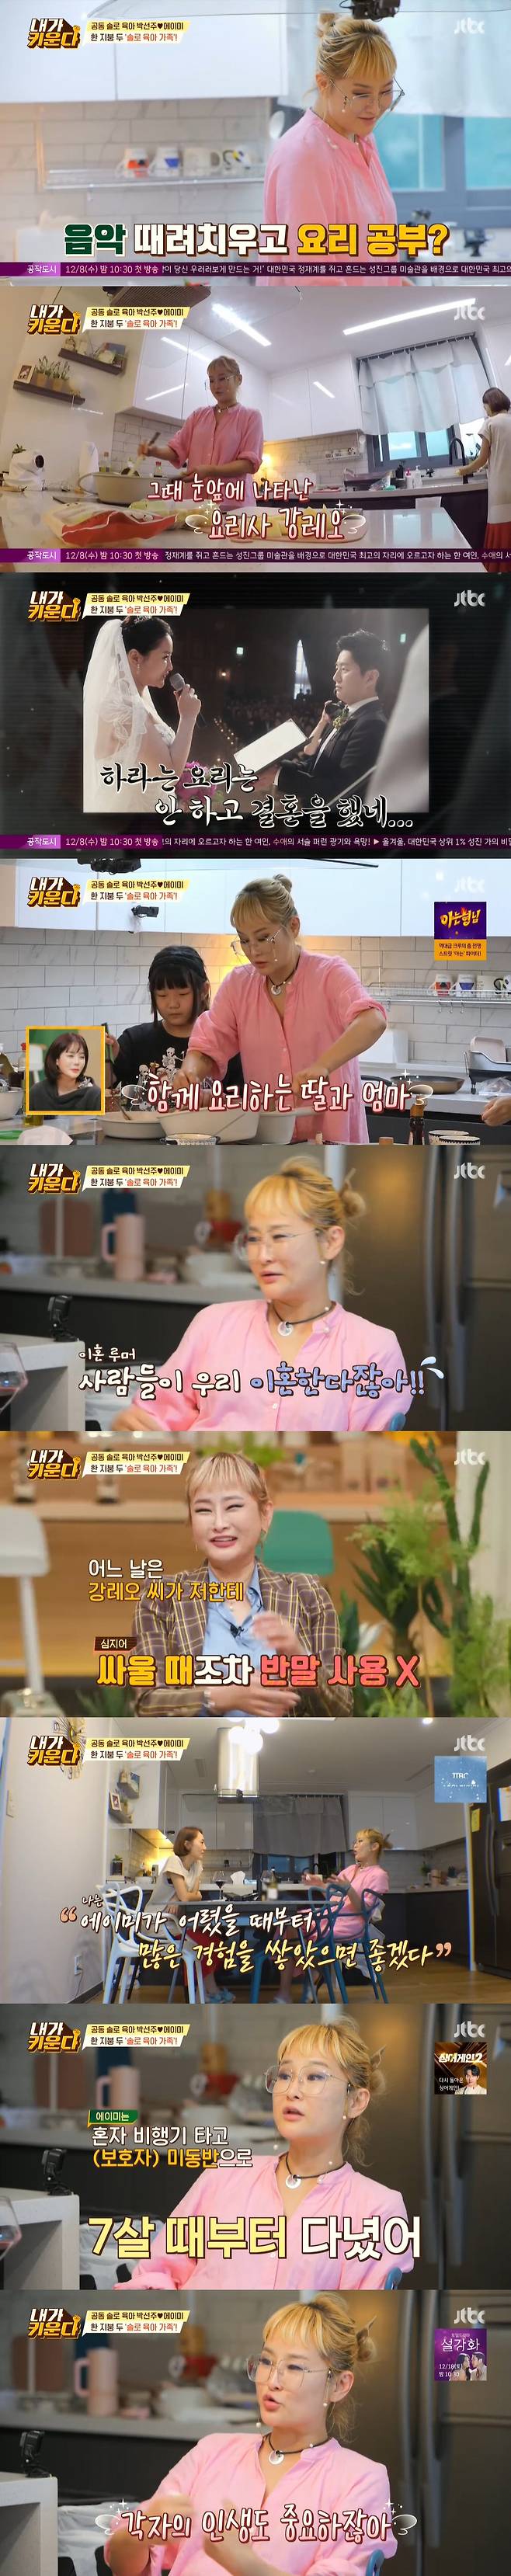 Park Seon-ju has revealed that he is co-parenting.24 Days broadcast JTBCs Brave Solo Parenting - I Raise (hereinafter referred to as I Raise) revealed a routine in common parenting.Amy was amused with her arms flashing in the third period of KAYAK and Sooyoung classes; Amy, who boarded KAYAK, was scared but her face was full of smiles.Amy, who met the water, challenged from the intermittent Sooyoung class to the breaststroke, and Park Seon-ju admired her daughters Sooyoung ability, saying, Ive never seen Sooyoung.At that time, Park Seon-ju visited the school and had a tea time with the principal.Park Seon-ju said that he usually lives with school teachers and has attracted attention by showing the principal and the conversation between the contents of Korea and shopping information without hesitation.Back home, Park Seon-ju quickly turned into a musician.At that time, Park Seon-ju talked to the artists who worked together on the phone, and in this process, he was surprised to speak six languages ​​including English, French and Japanese.After finishing his work, Park Seon-ju hastened to prepare dinner; the menu was fried soy sauce chicken; then a strange mother and daughter appeared, and Park Seon-ju said, I am a partner who lives together.I live together. Park Seon-ju was living with an acquaintance family who was close to her family when she was living in China.Park Seon-ju said: Soyun Fader is in business in China; people with similar environments have gathered together.I thought it would be better than raising it alone, so I suggested that we raise it together. Thats when Park Seon-ju recalled meeting her husband Kang Leo, who said: Ive done so much work that Burnout has come.I tried to beat the music and study cooking, but then the chef Kang Leo appeared in front of me. He laughed, I did not study and went to marriage. Amy helped her mother prepare dinner and showed her skillful cooking skills, reminiscent of Father Kang Leo, from ingredients to fire control.Park Seon-ju talked with Soyuns mother over wine, saying, When you came to the chef last year, I liked your sister so much. Amy love is different.Park Seon-ju said, We are divorced. We are misunderstood, but I have never spoken even though I am actually marriage.I told Father, Youll miss Amy, but I want Amy to have a lot of experience since she was a child. Amy said, I went on a plane alone and went to (protector) since I was seven years old.Park Seon-ju said, I talk a lot about solo parenting, but I want to give my child the happiest time rather than focusing on solo parenting. My family is happy when each life is happy.